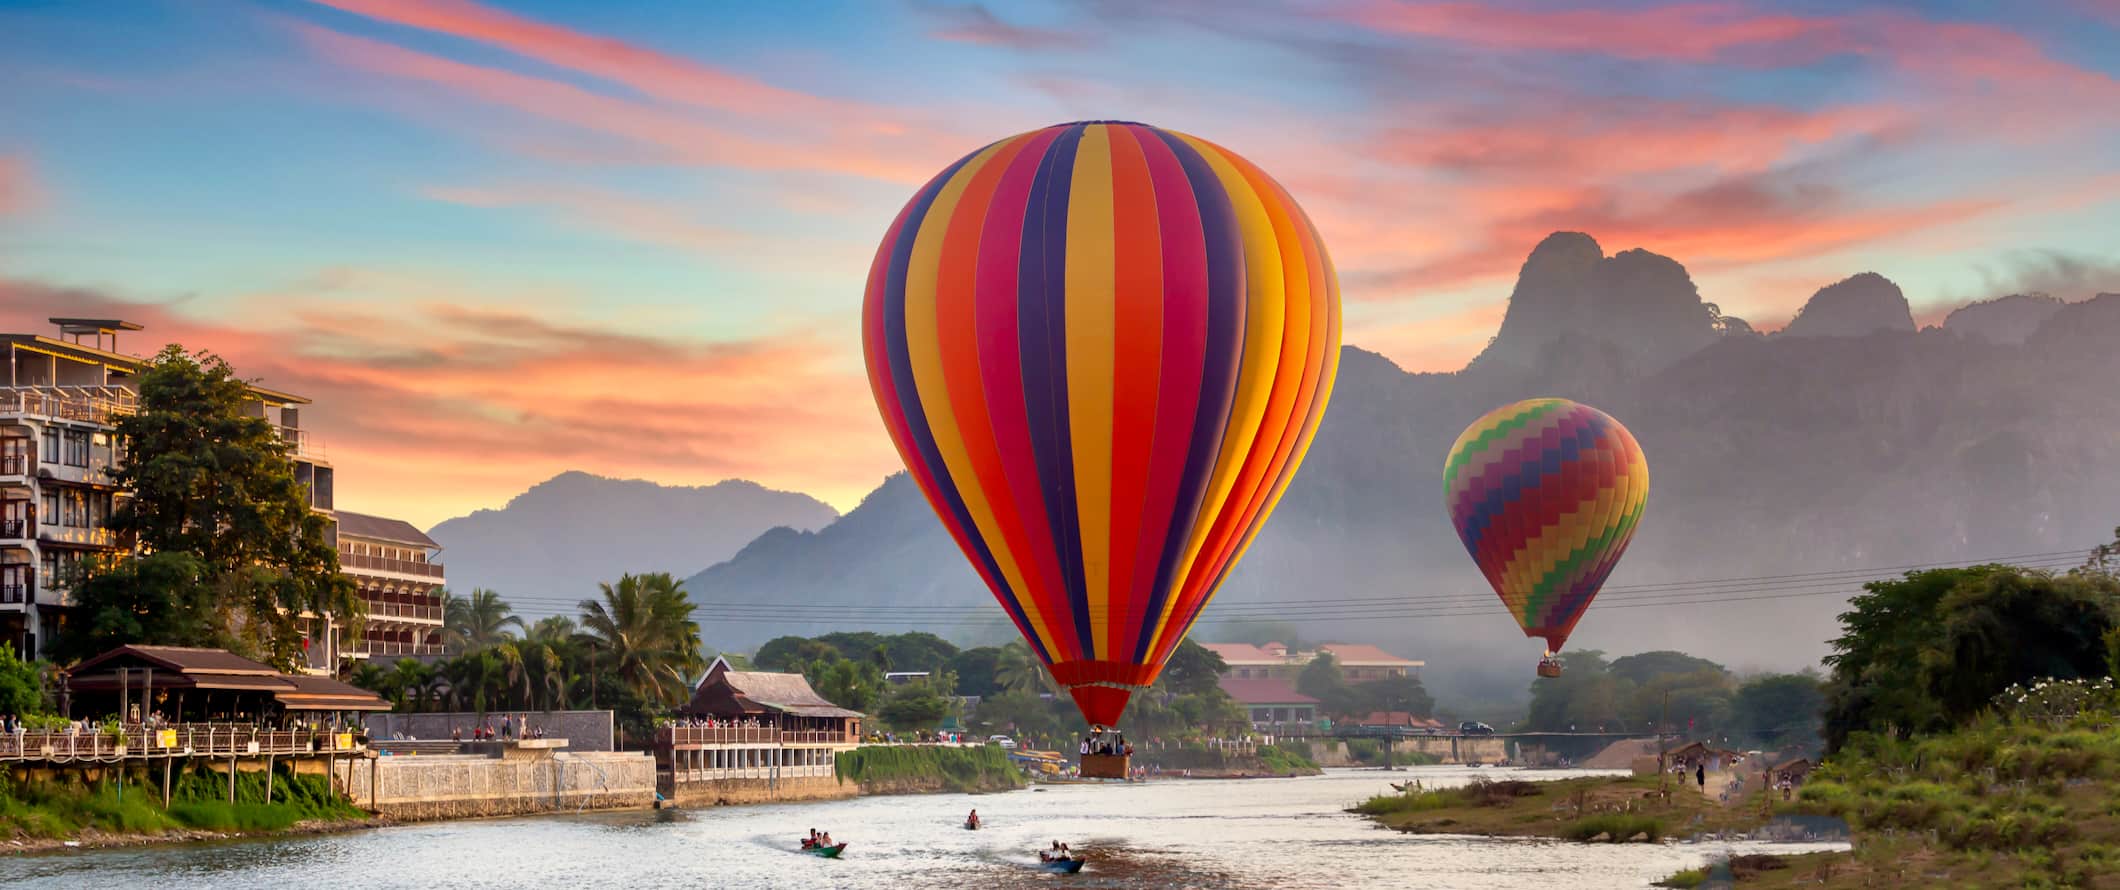 Hot air balloons flying over the water in rural Vang Vieng, Laos